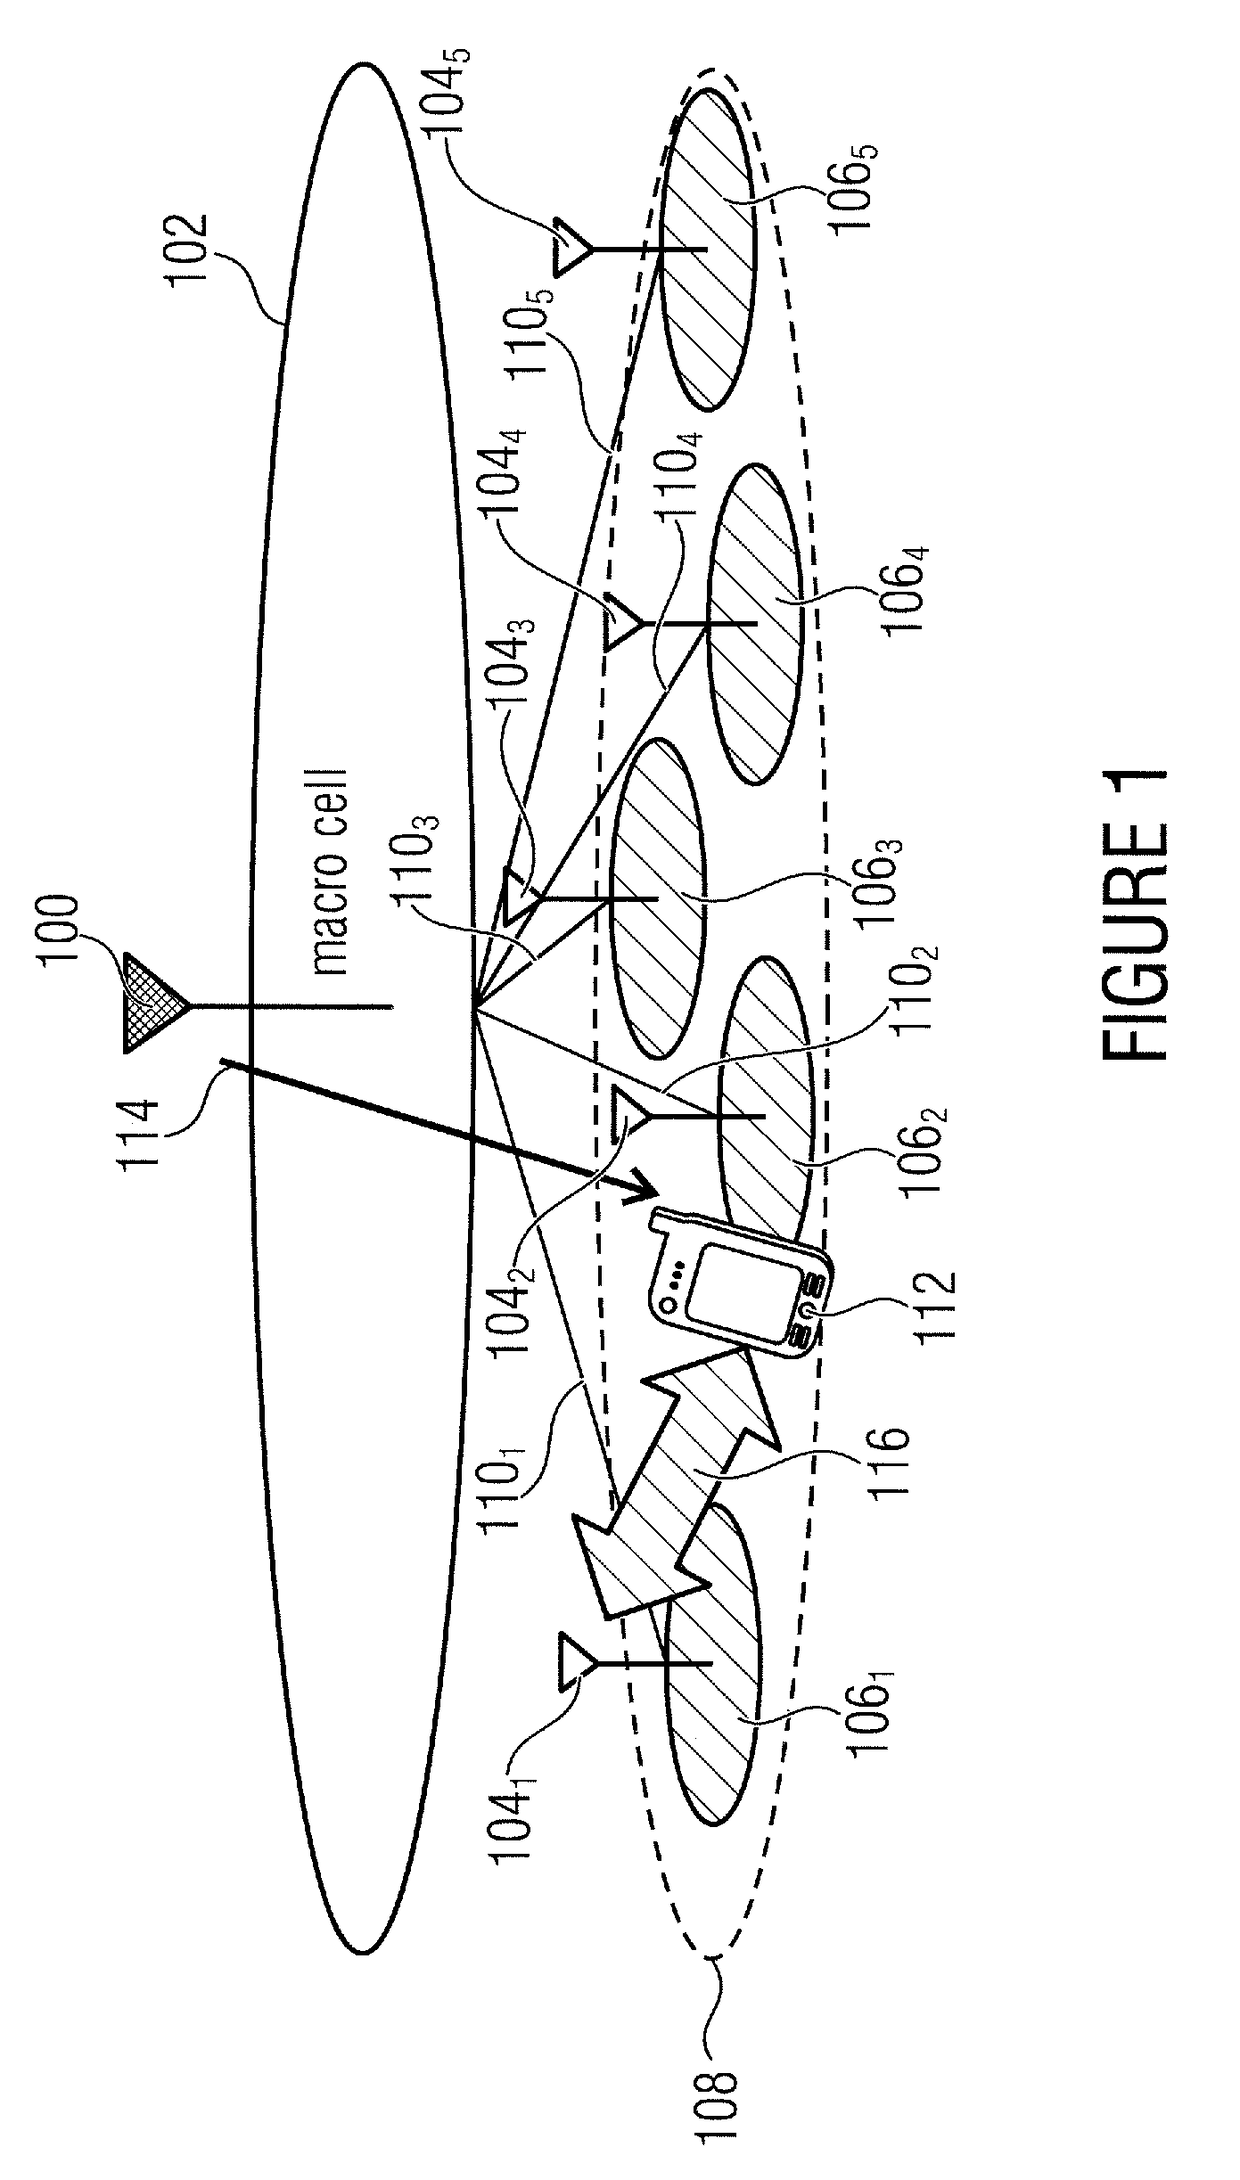 Macro cell assisted small cell discovery and resource activation